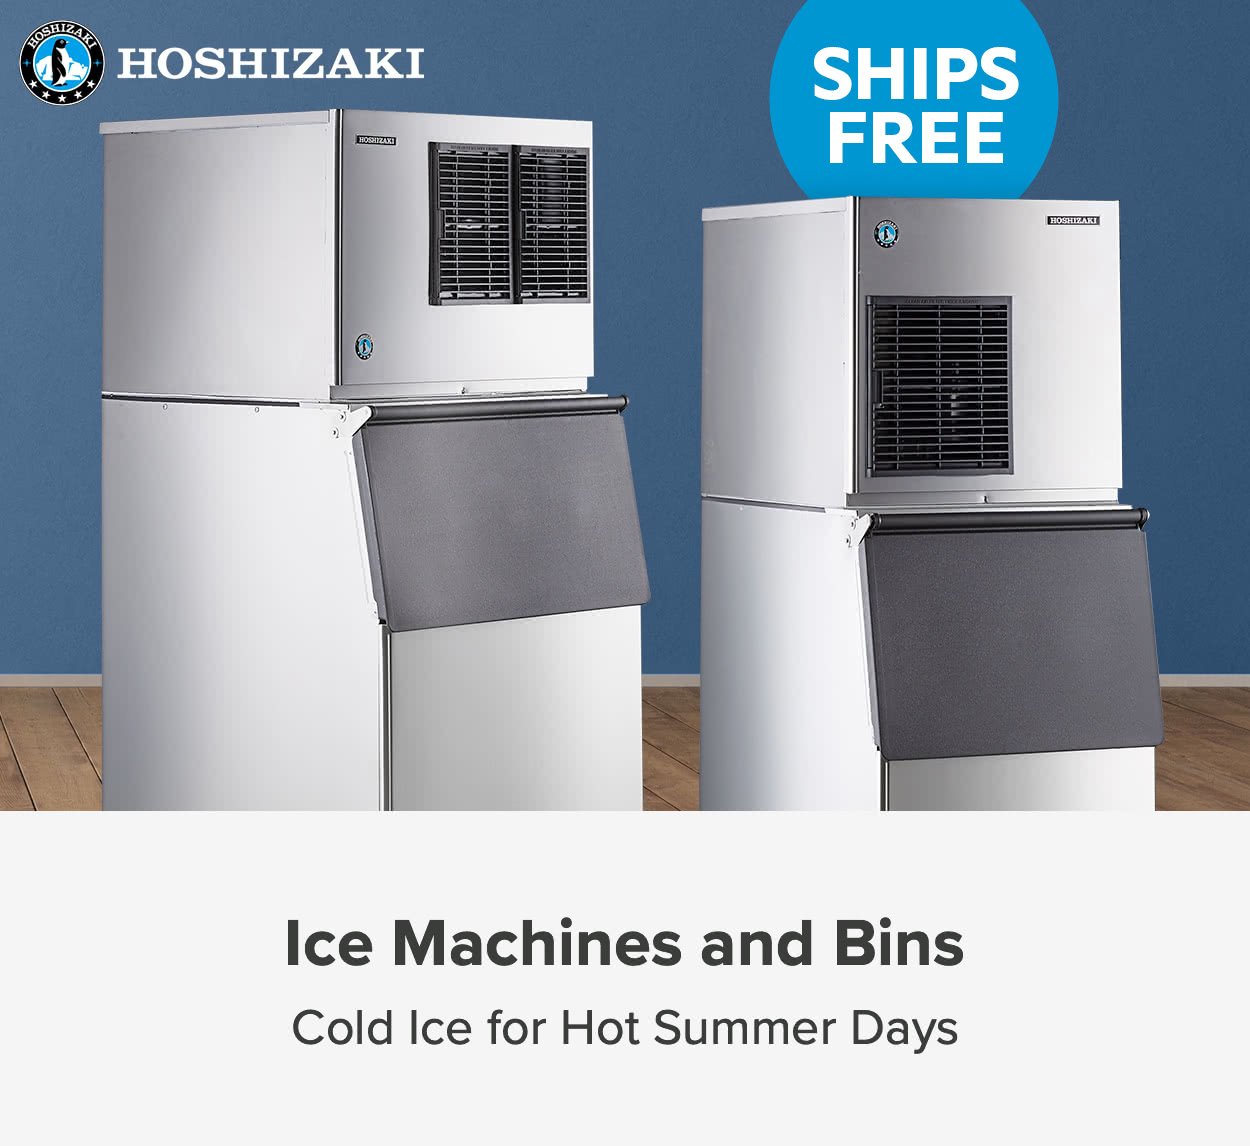 Shop Hoshizaki Ice Machines and Bins to Have Cold Ice All Summer Long